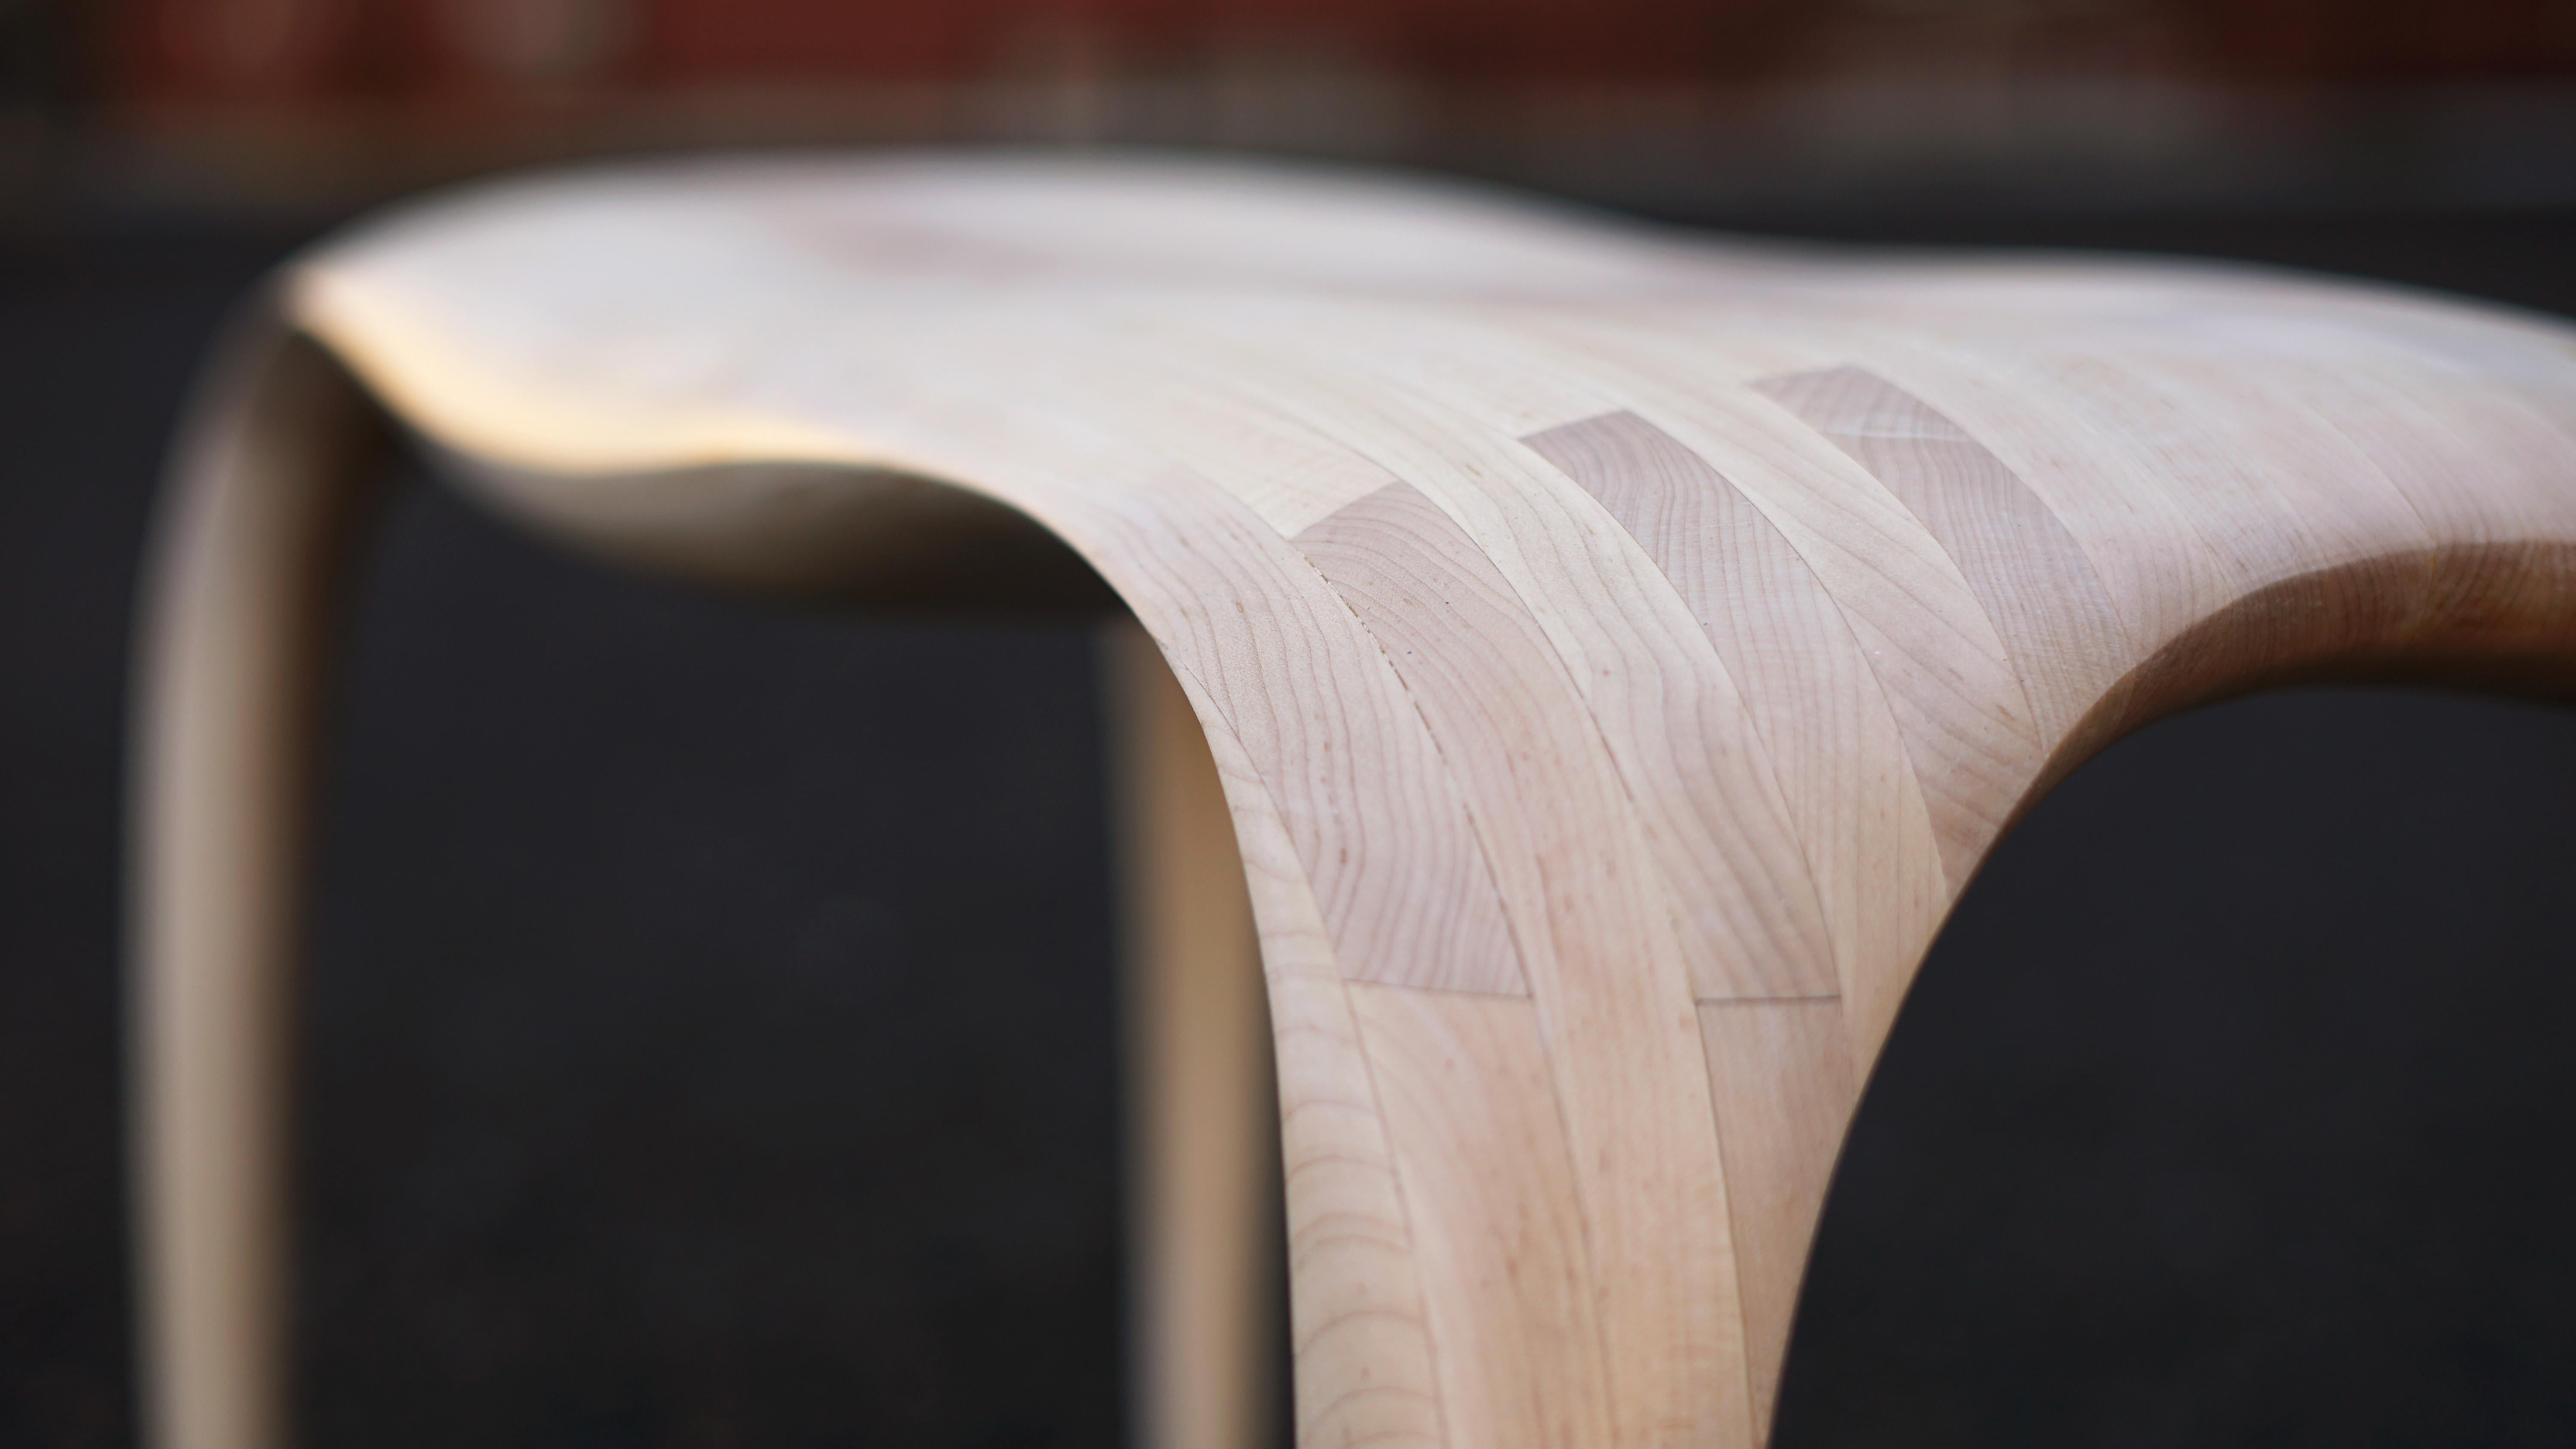 Hand-Carved Sculptural Bench in wood - 'Gravity Bench' by Soo Joo For Sale